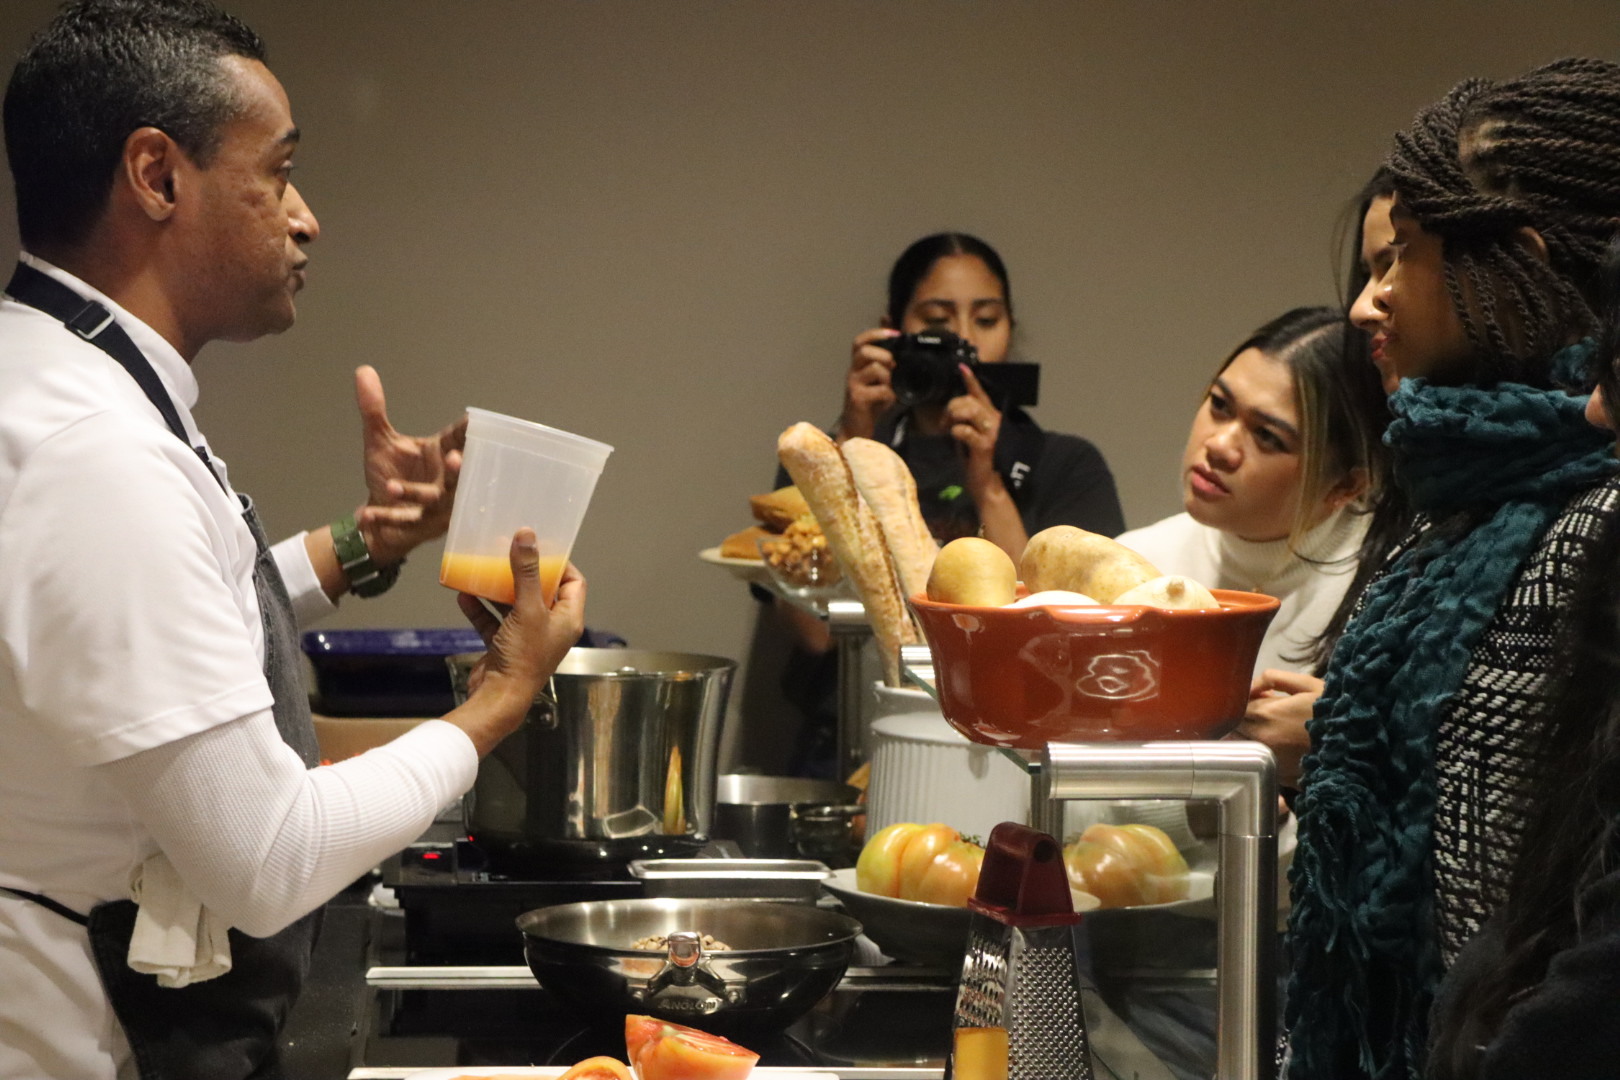 The East End Food Institute, in conjunction with the Stony Brook Residency Program in Social Medicine, hosted a hybrid cooking demonstration at the institute's headquarters at Stony Brook Southampton on February 1, title 